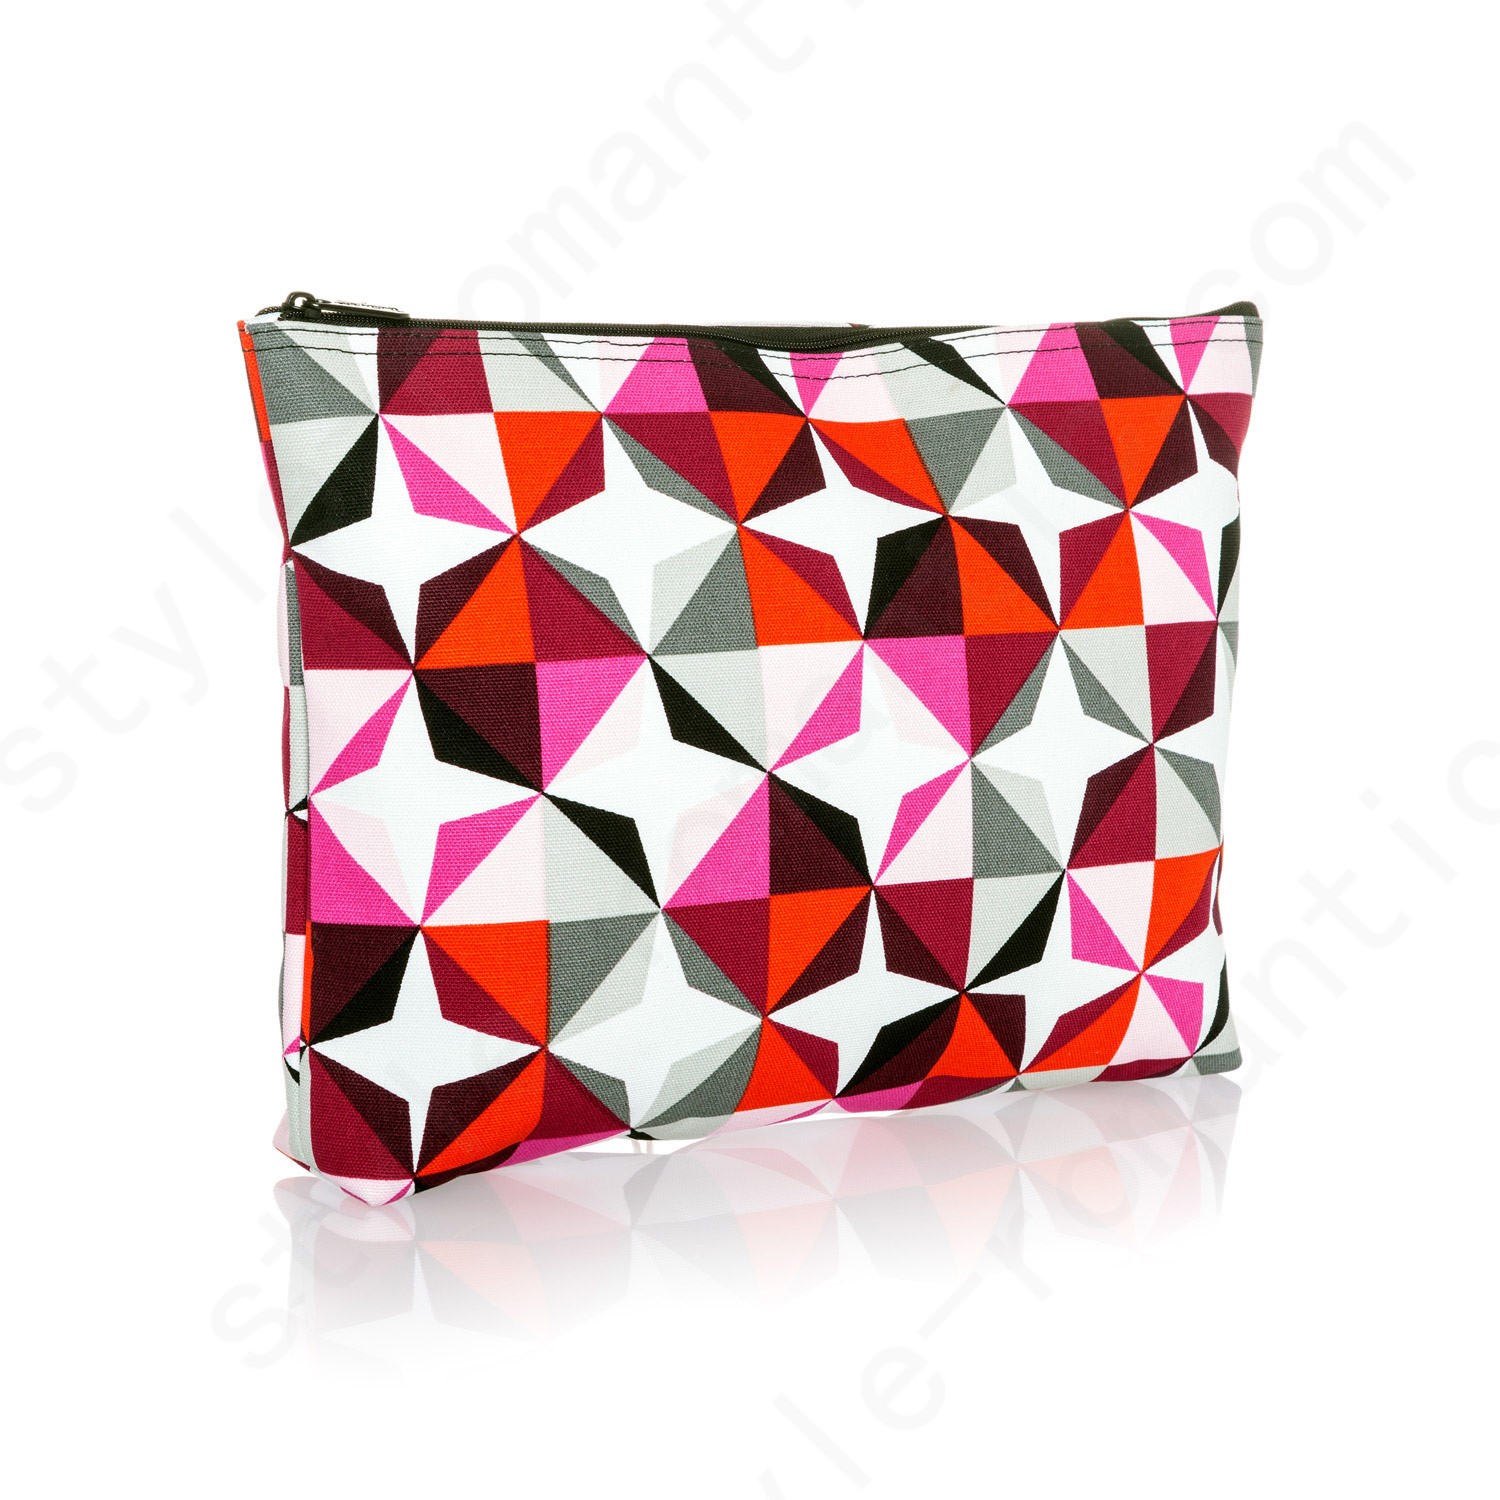 Thirty-One Gifts Zipper Pouch - Origami Pop Handbags Accessories - Thirty-One Gifts Zipper Pouch - Origami Pop Handbags Accessories